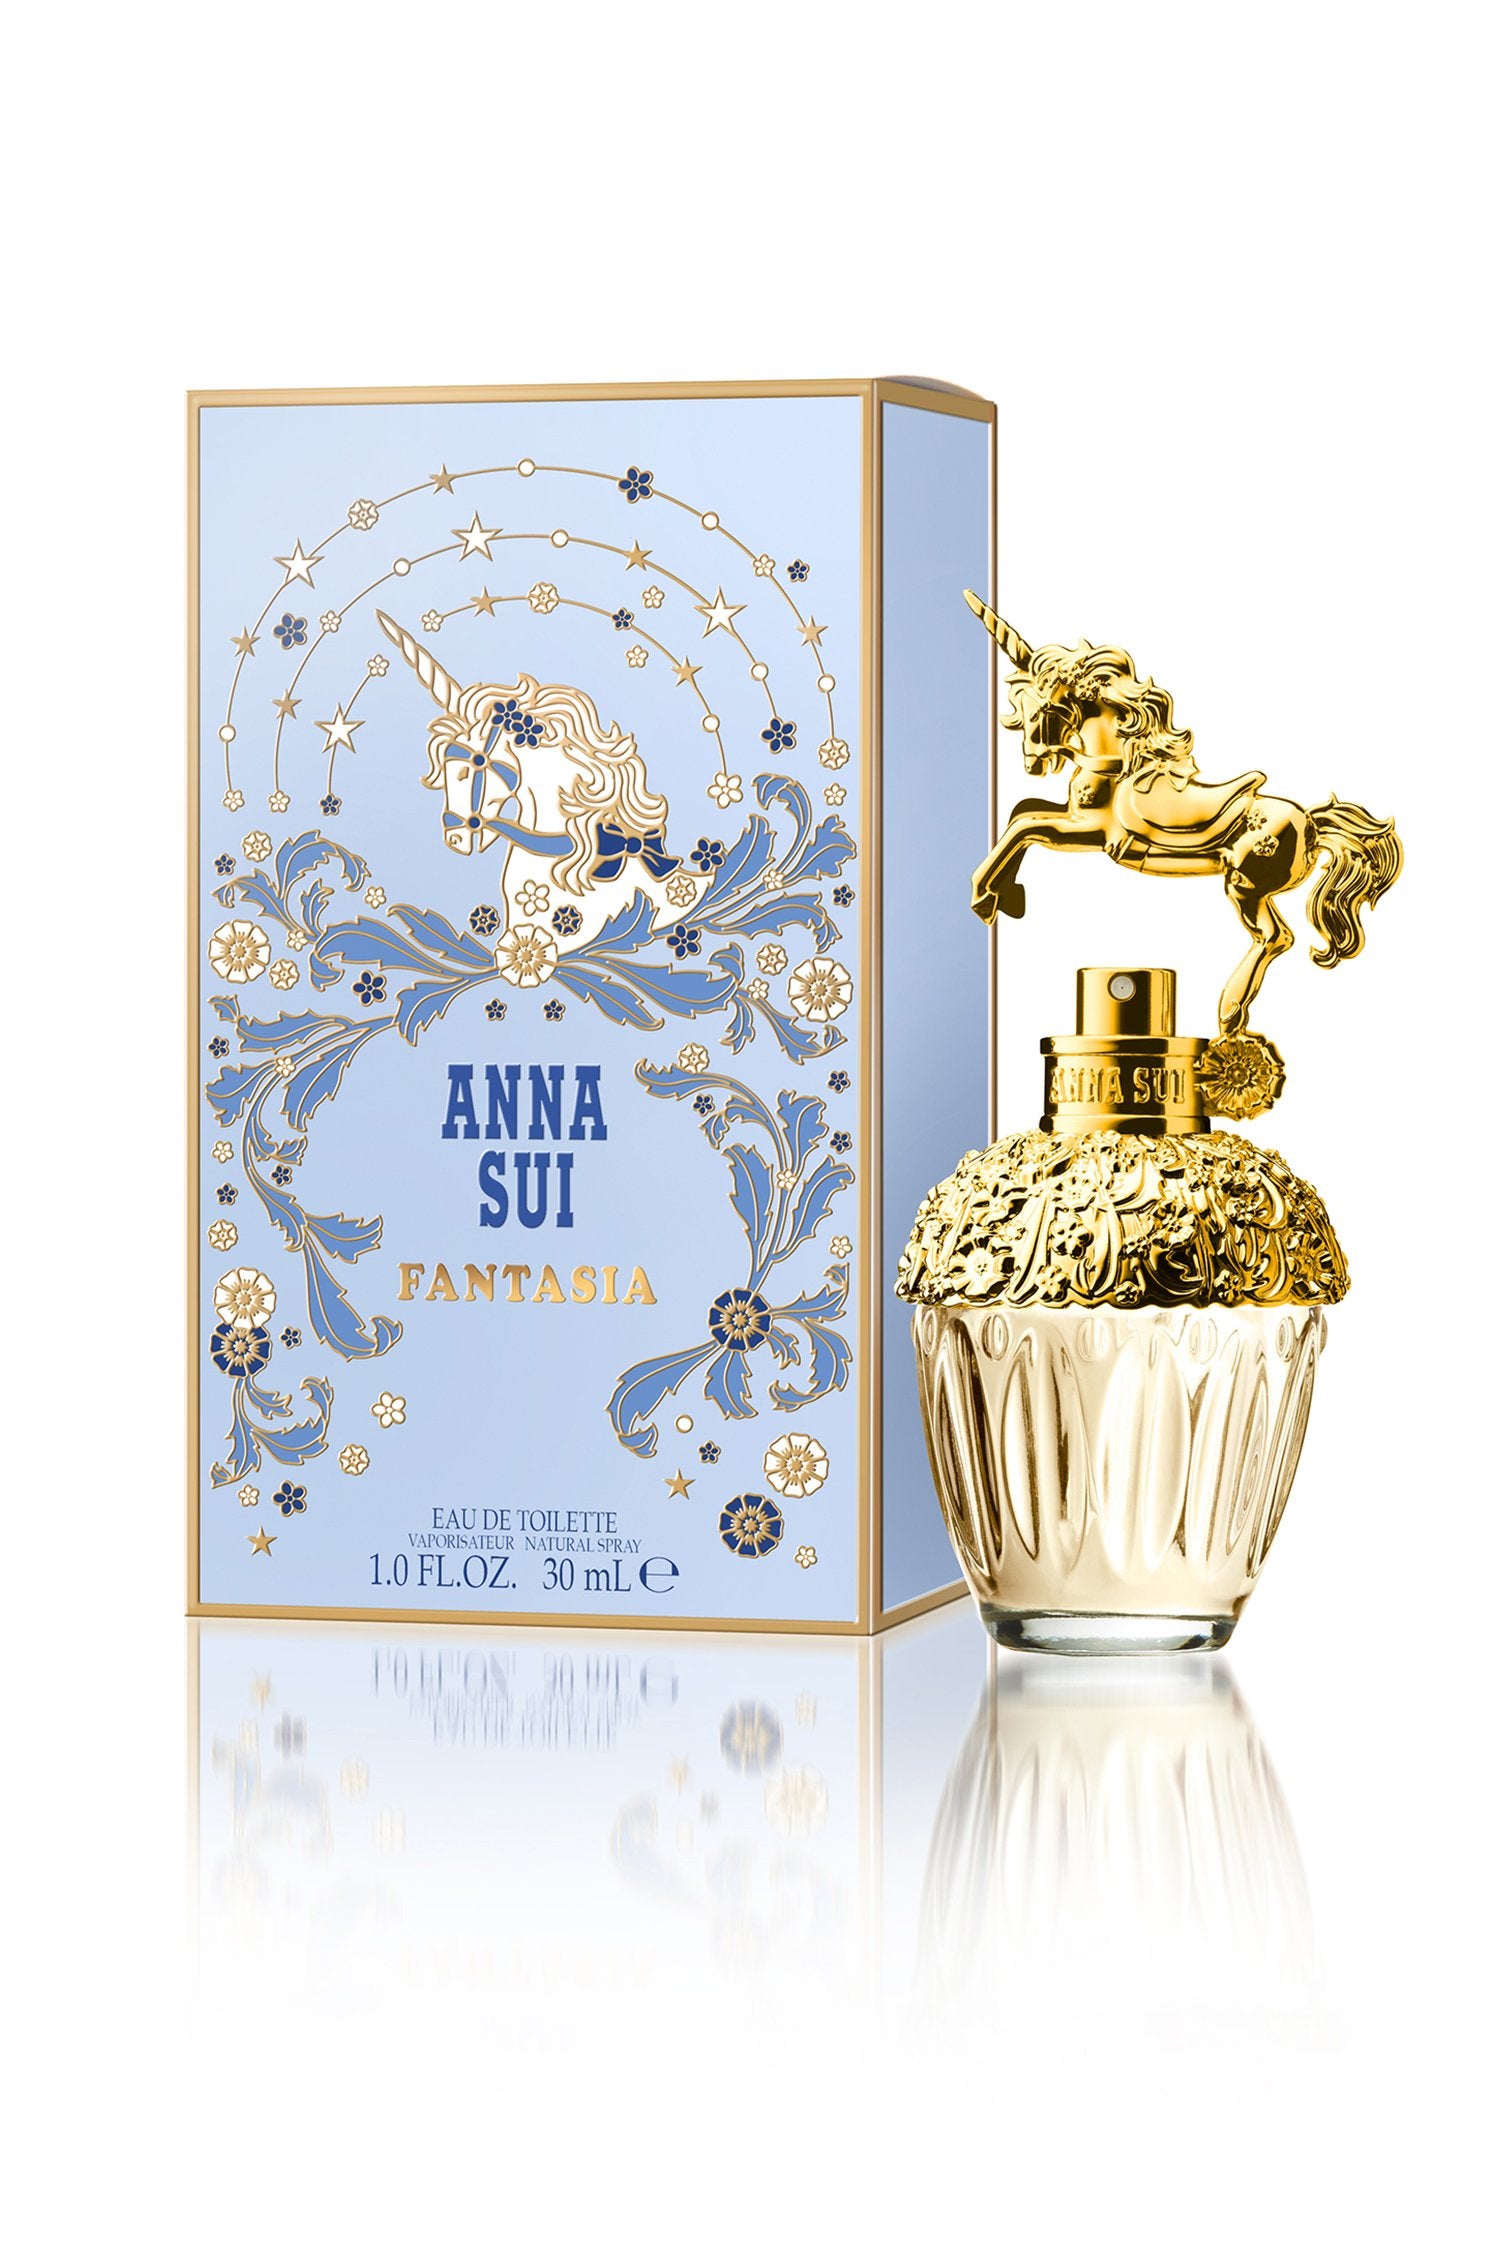 Fantasia sensual and feminine mix of sweet pink pomelo and spicy pink pepper. The floral notes are Golden cypress and Himalayan cedar wood